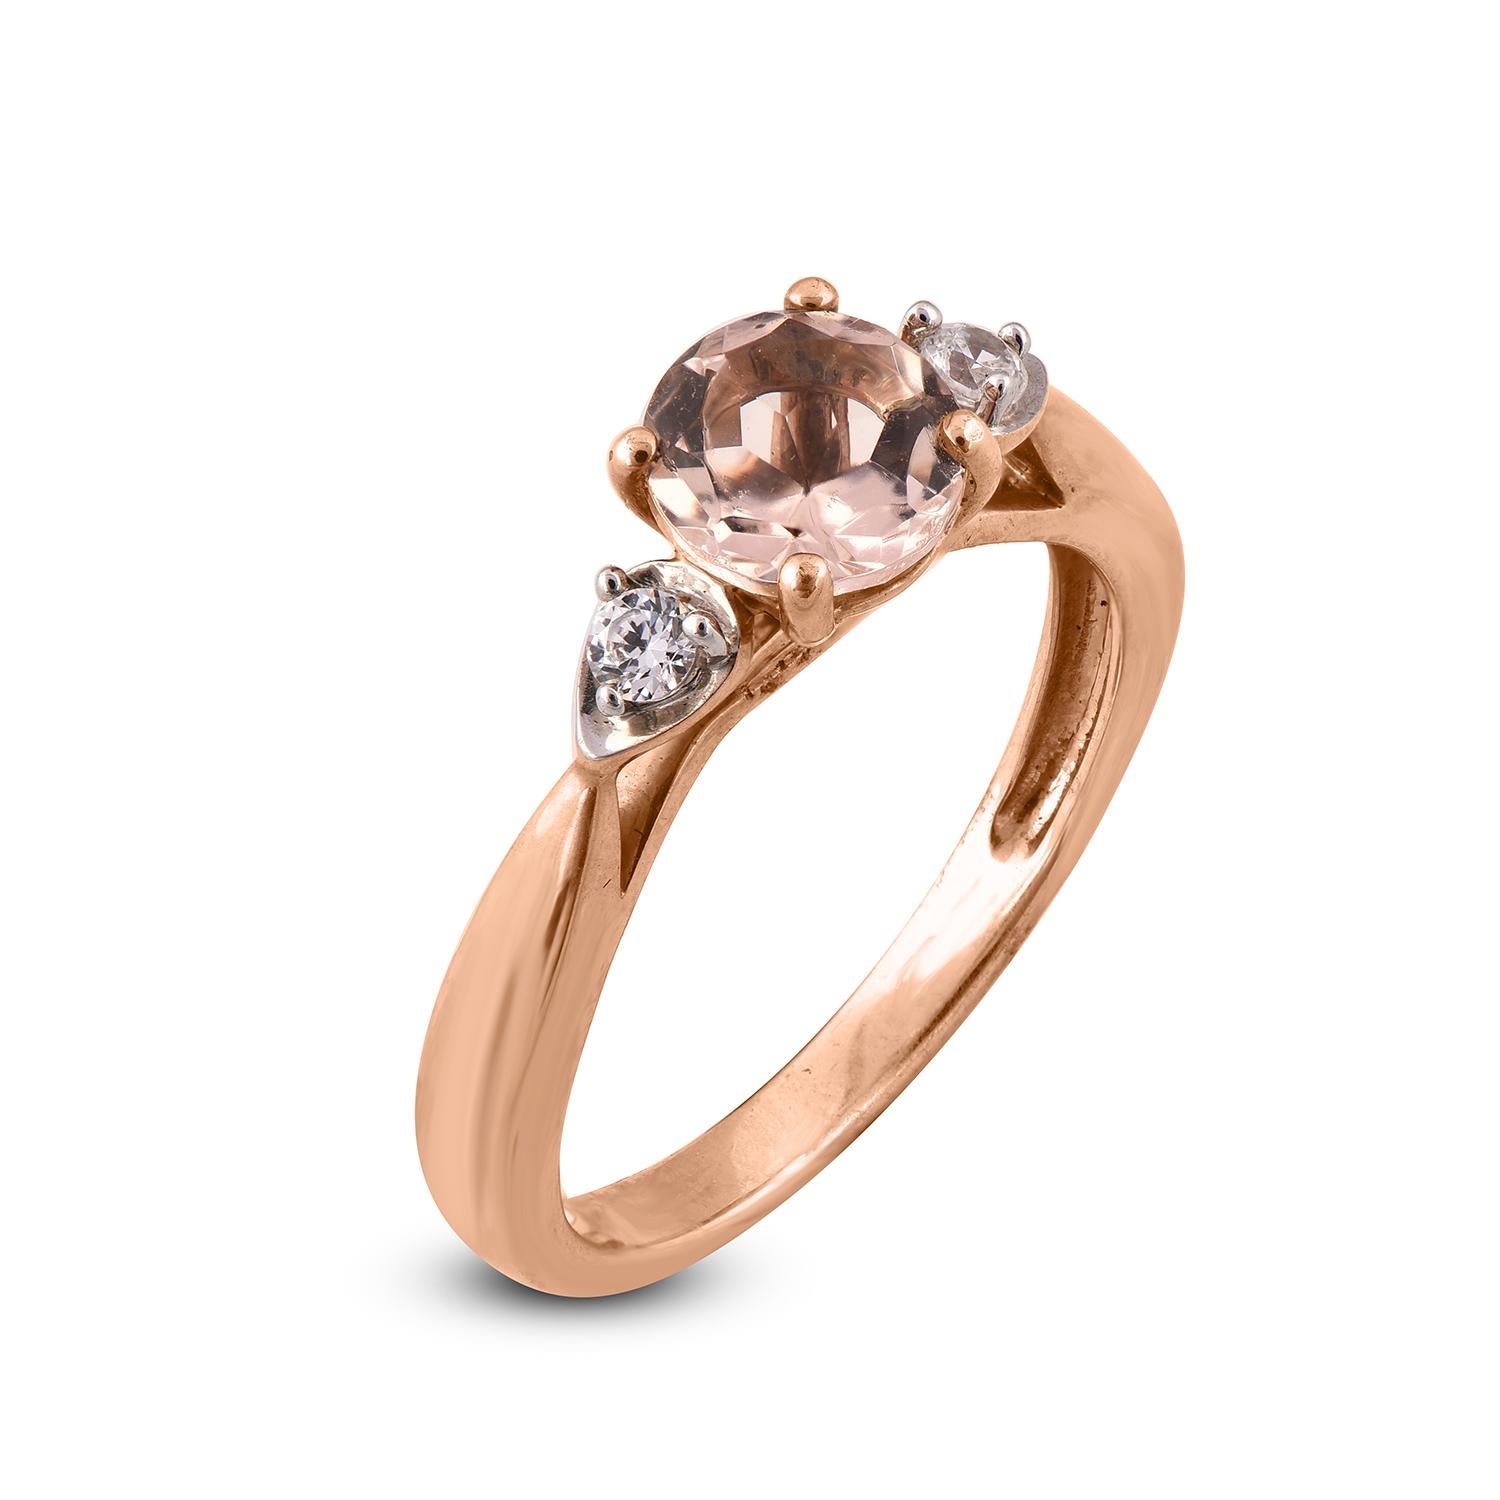 This diamond ring sparkles with 1 morganite gemstone with 2 white diamonds and is fashioned in 14 karat rose gold. The diamonds are elegantly set in prong  setting. Diamonds are graded H-I Color, I2 Clarity.
